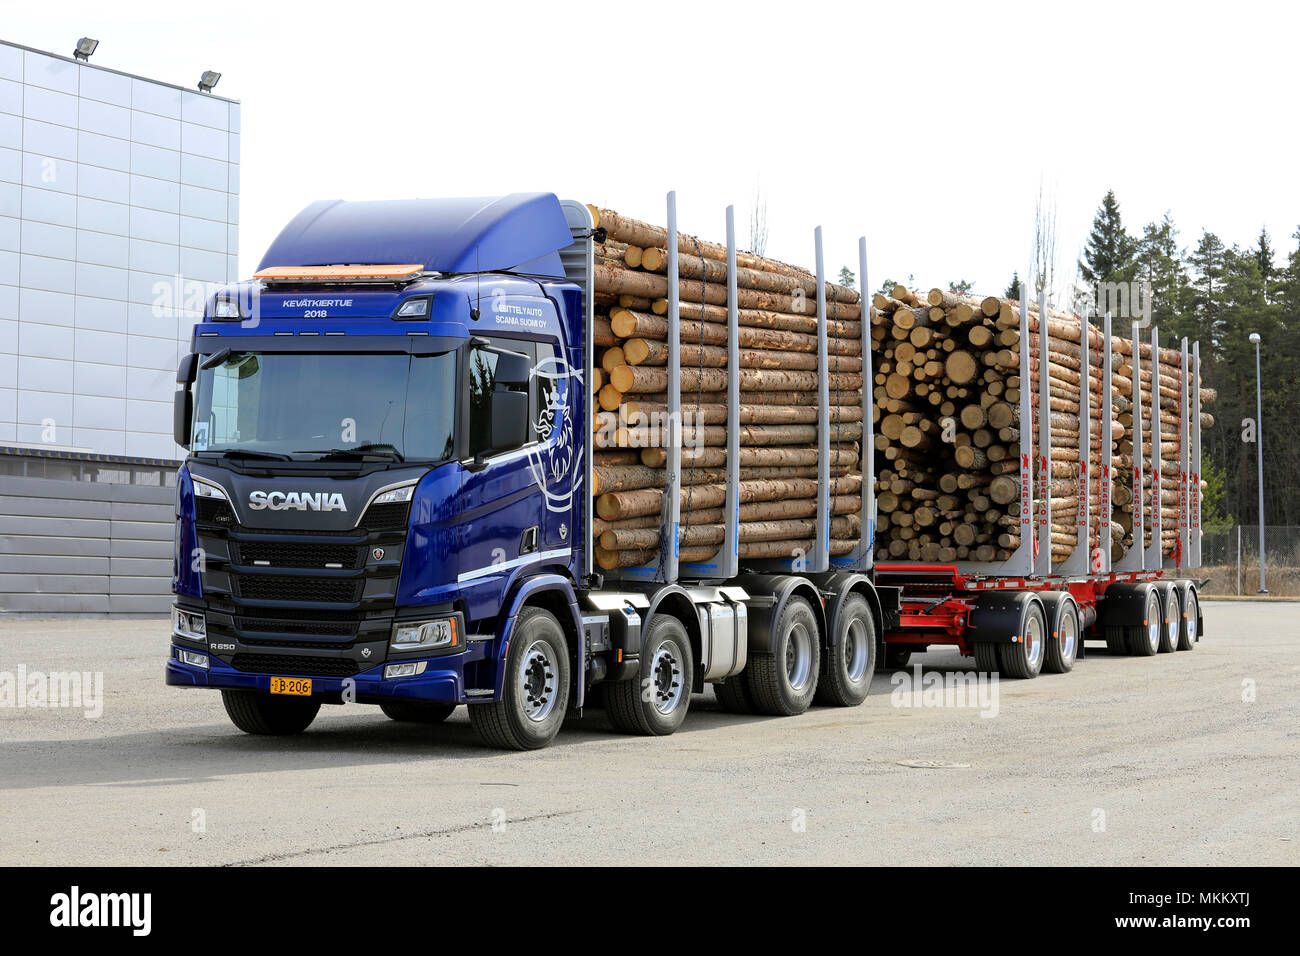 LIETO, FINLAND - APRIL 12, 2018: New blue Scania R650 logging truck parked during Scania Tour 2018 in Turku. Stock Photo